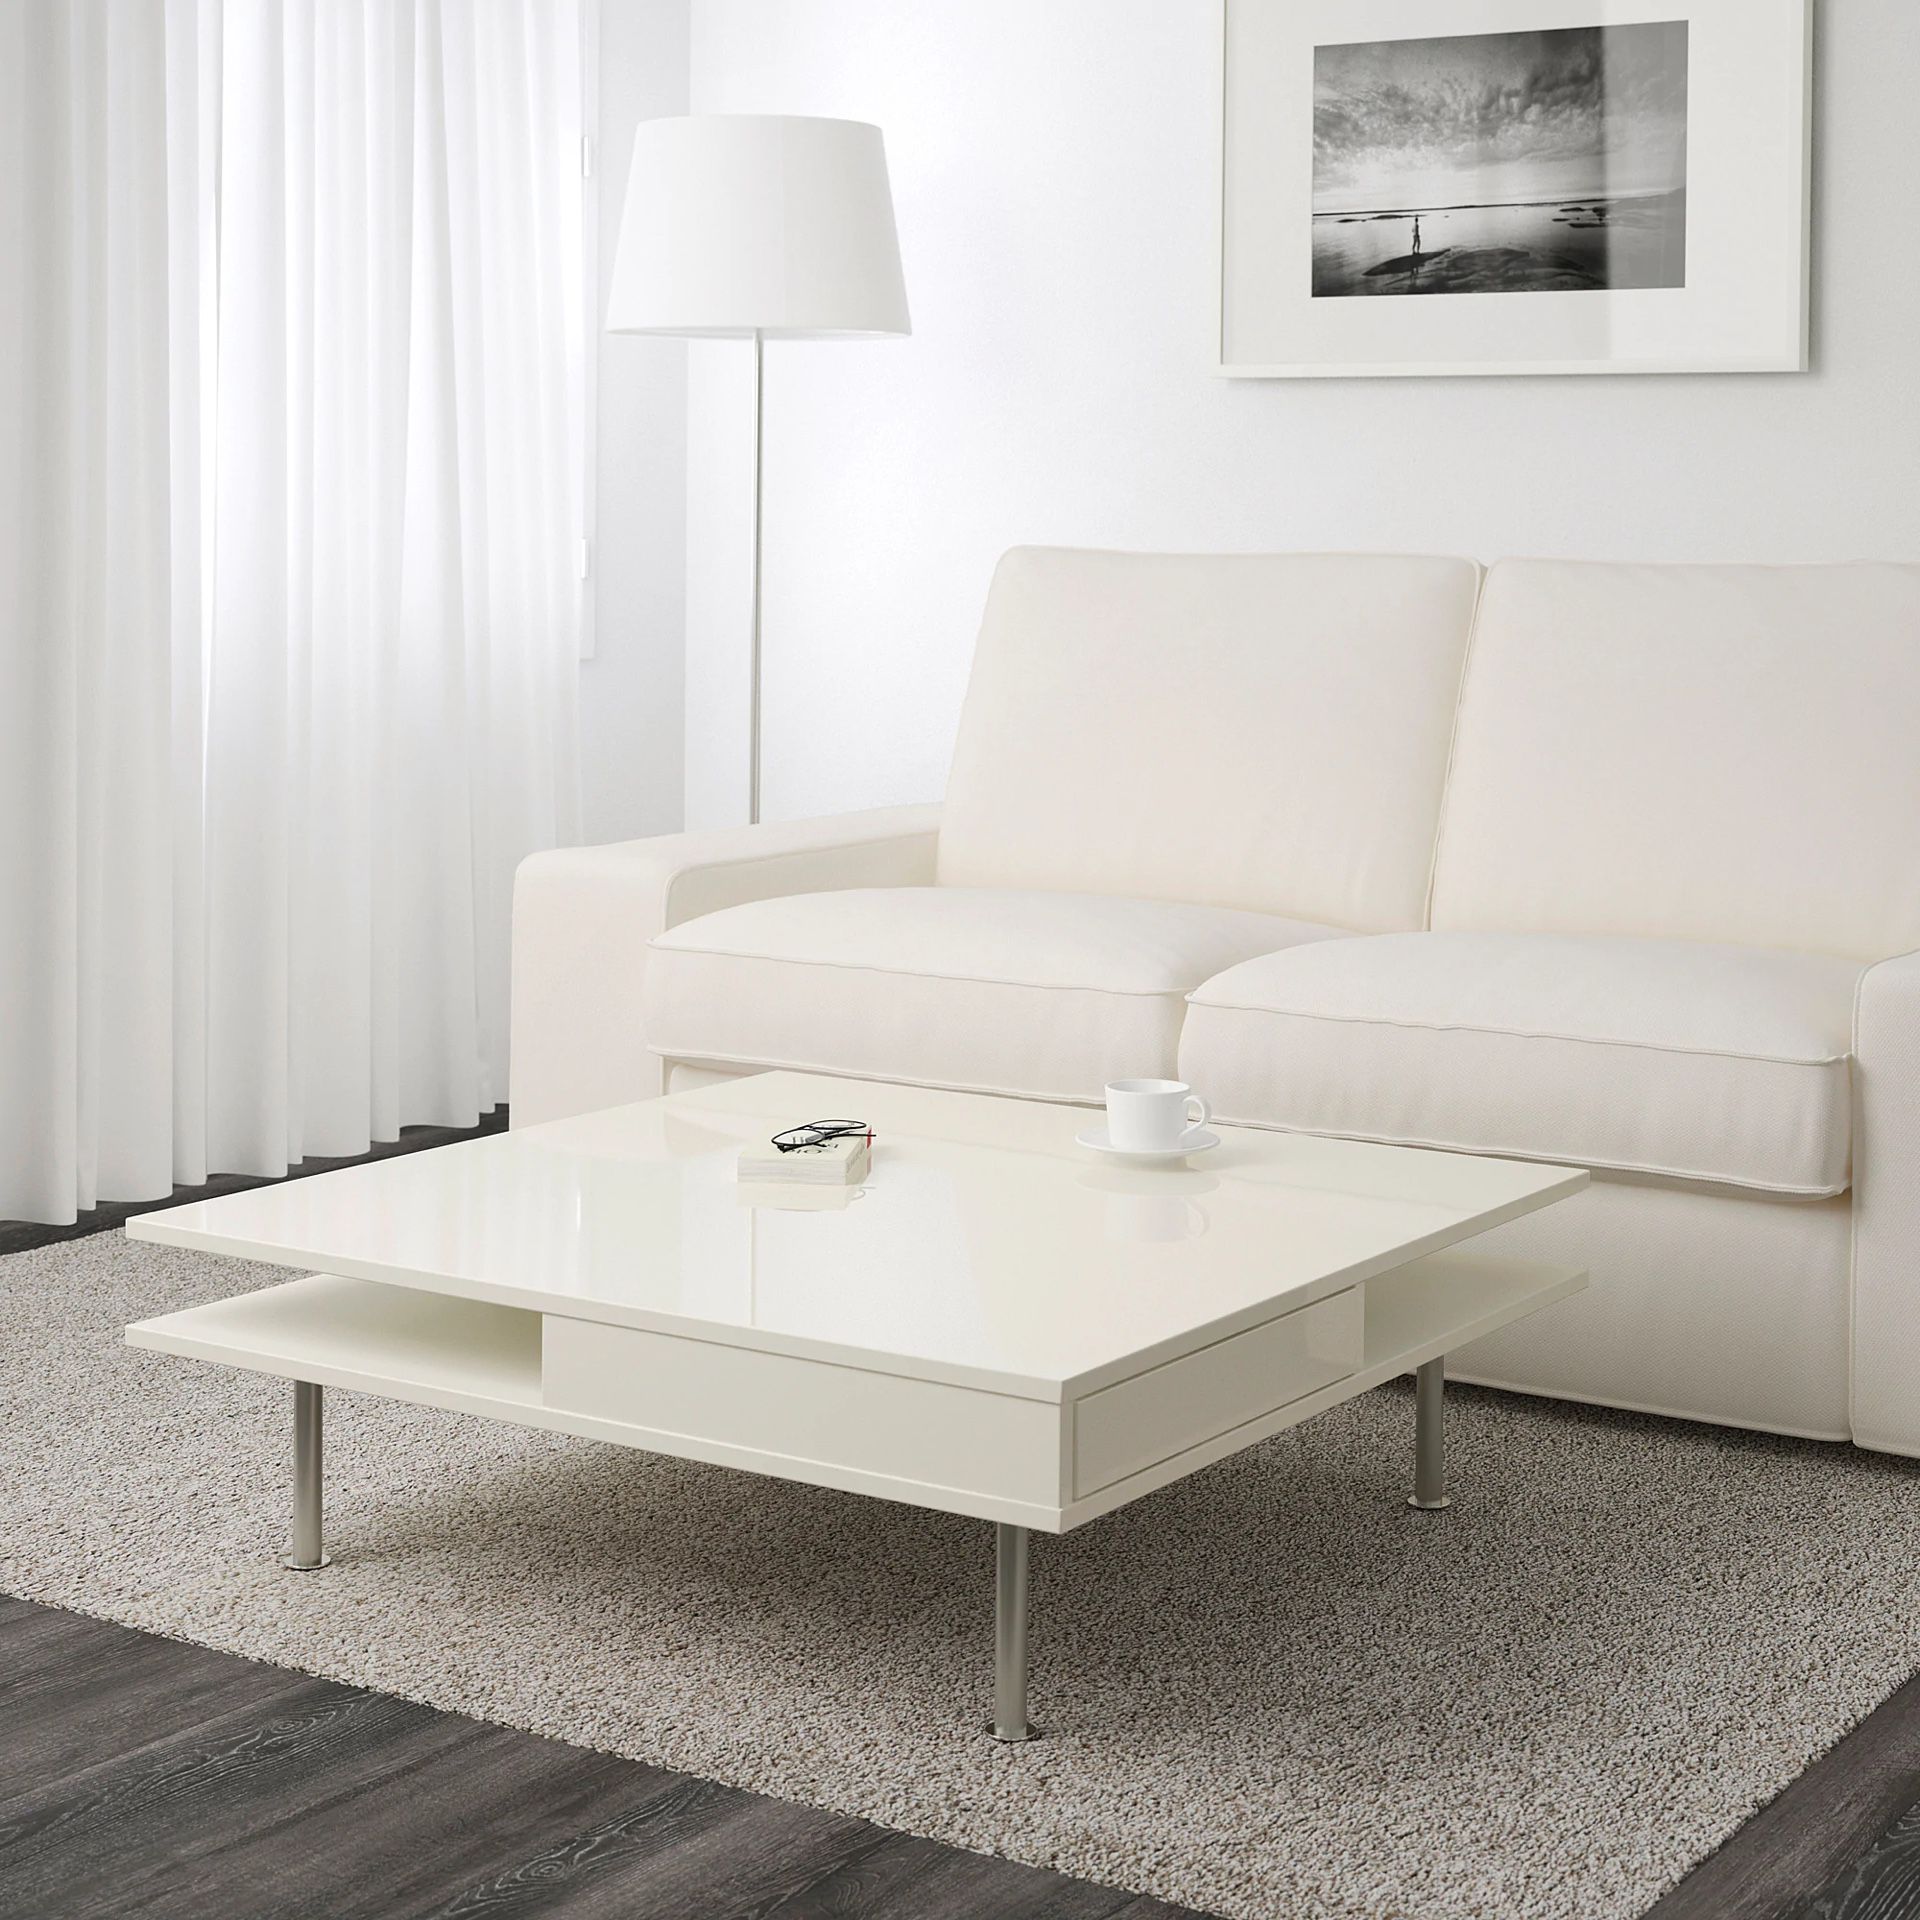 Coffee table, high gloss white with 2 drawers & 2 shelves